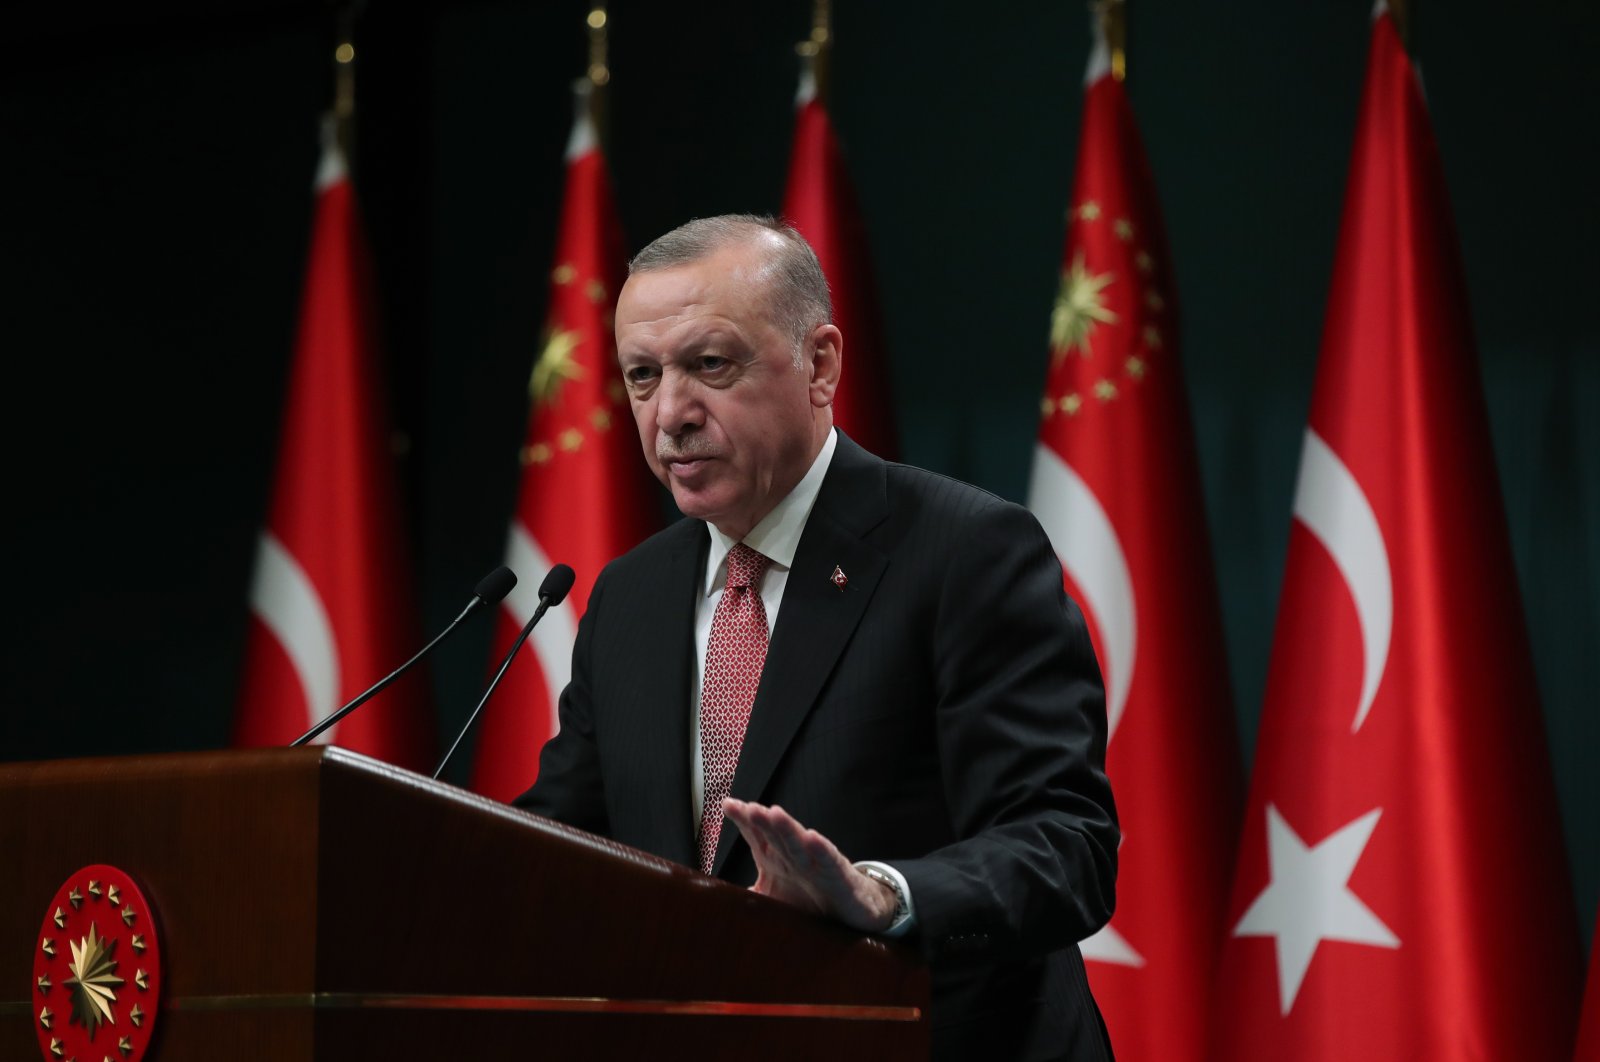 President Recep Tayyip Erdoğan delivers a speech after the Cabinet meeting in the capital Ankara, Turkey, June 21, 2021. (AA Photo)